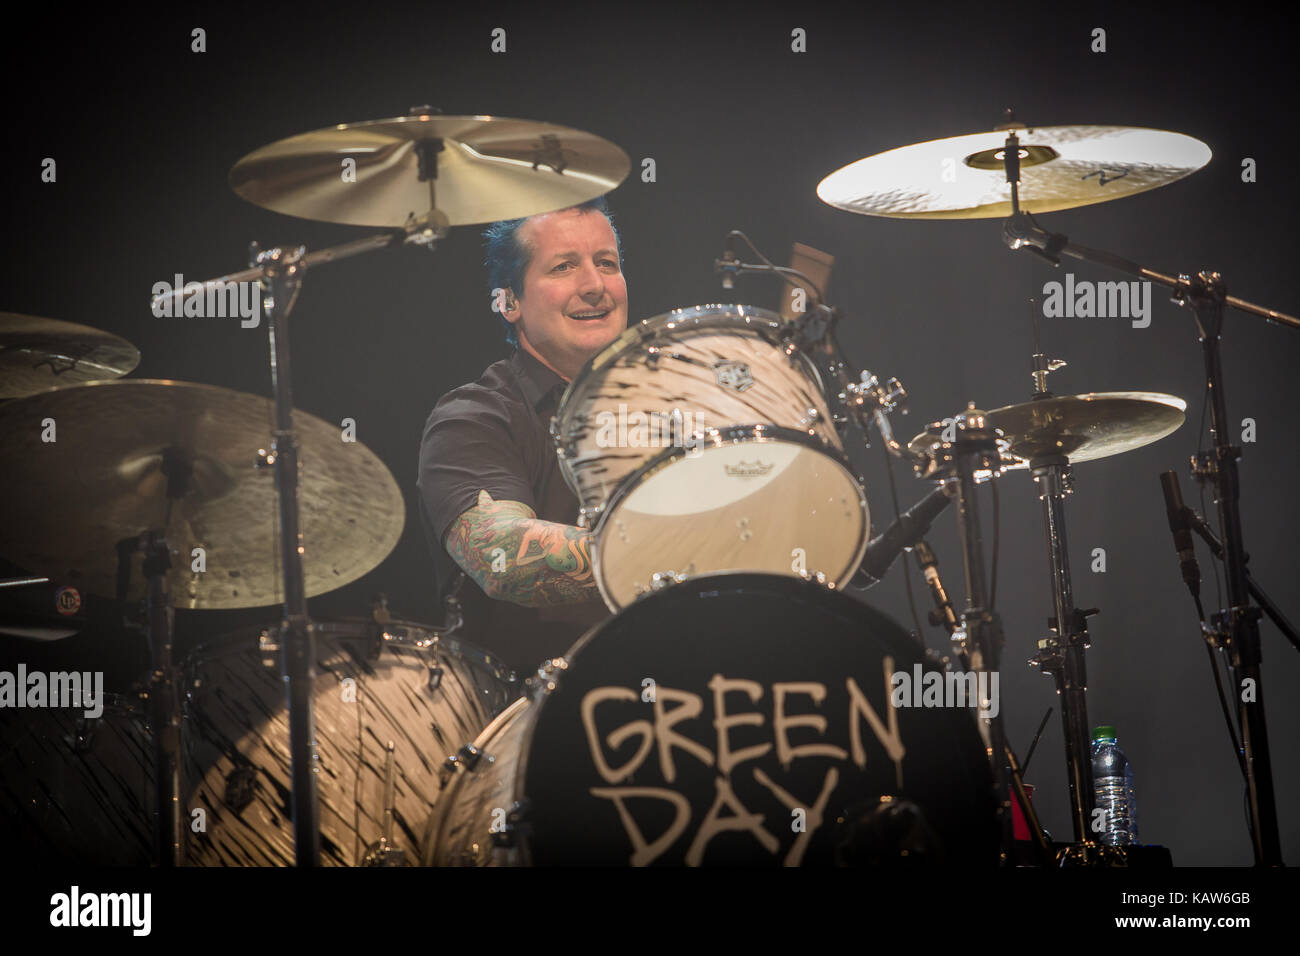 The American punk rock band Green Day performs a live concert at Oslo Spektrum. Here drummer Tré Cool is seen live on stage. Norway, 25/01 2017. Stock Photo